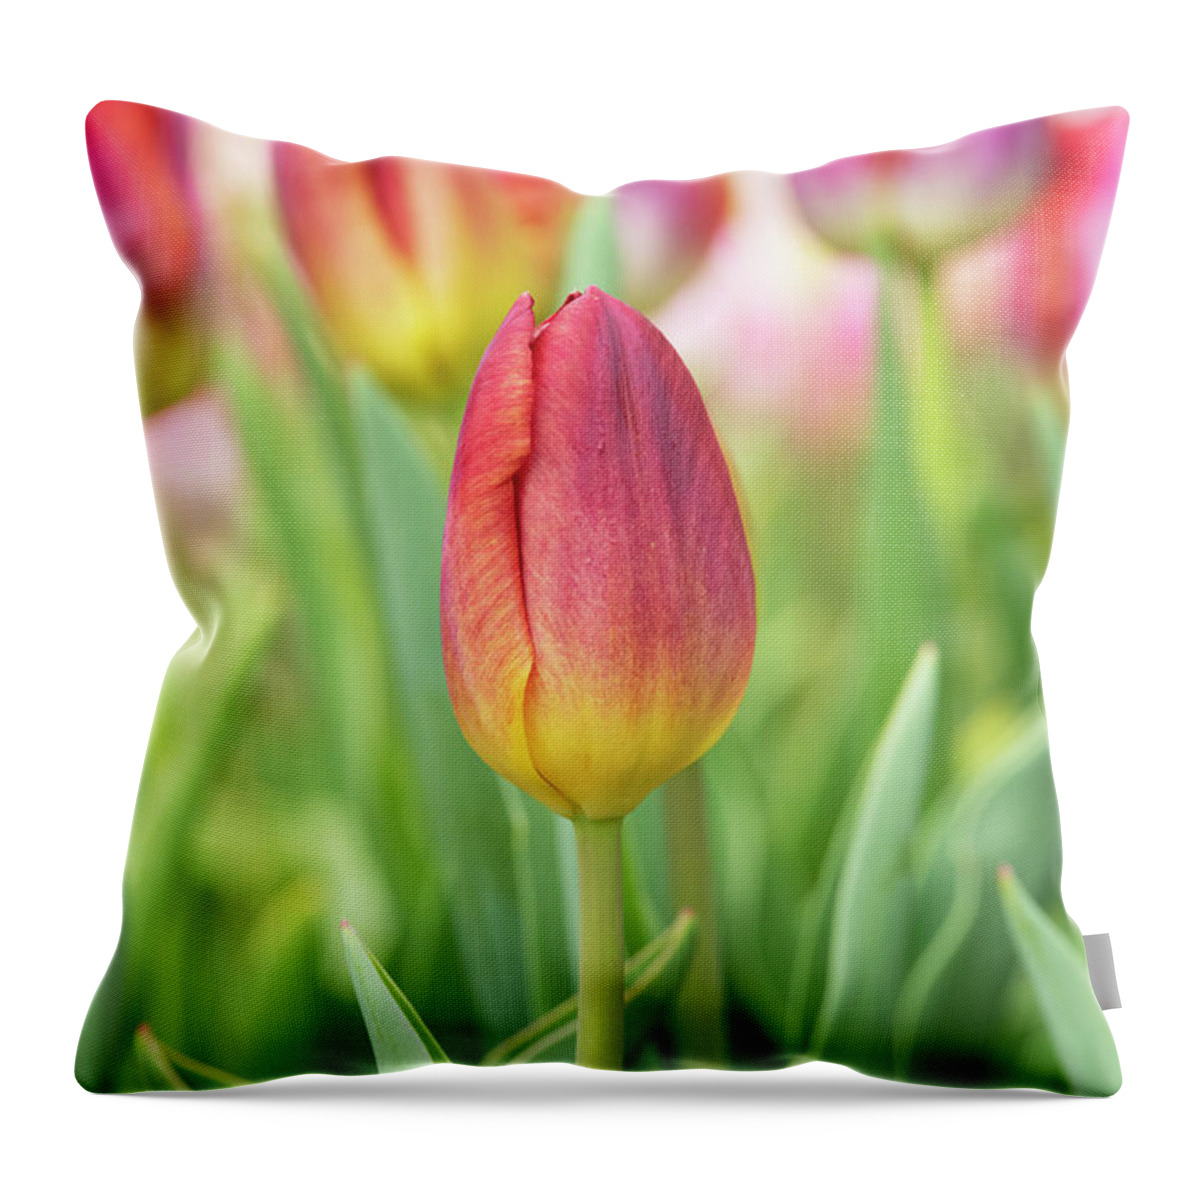 Tulip Throw Pillow featuring the photograph Tulip Amber Glow Flower by Tim Gainey